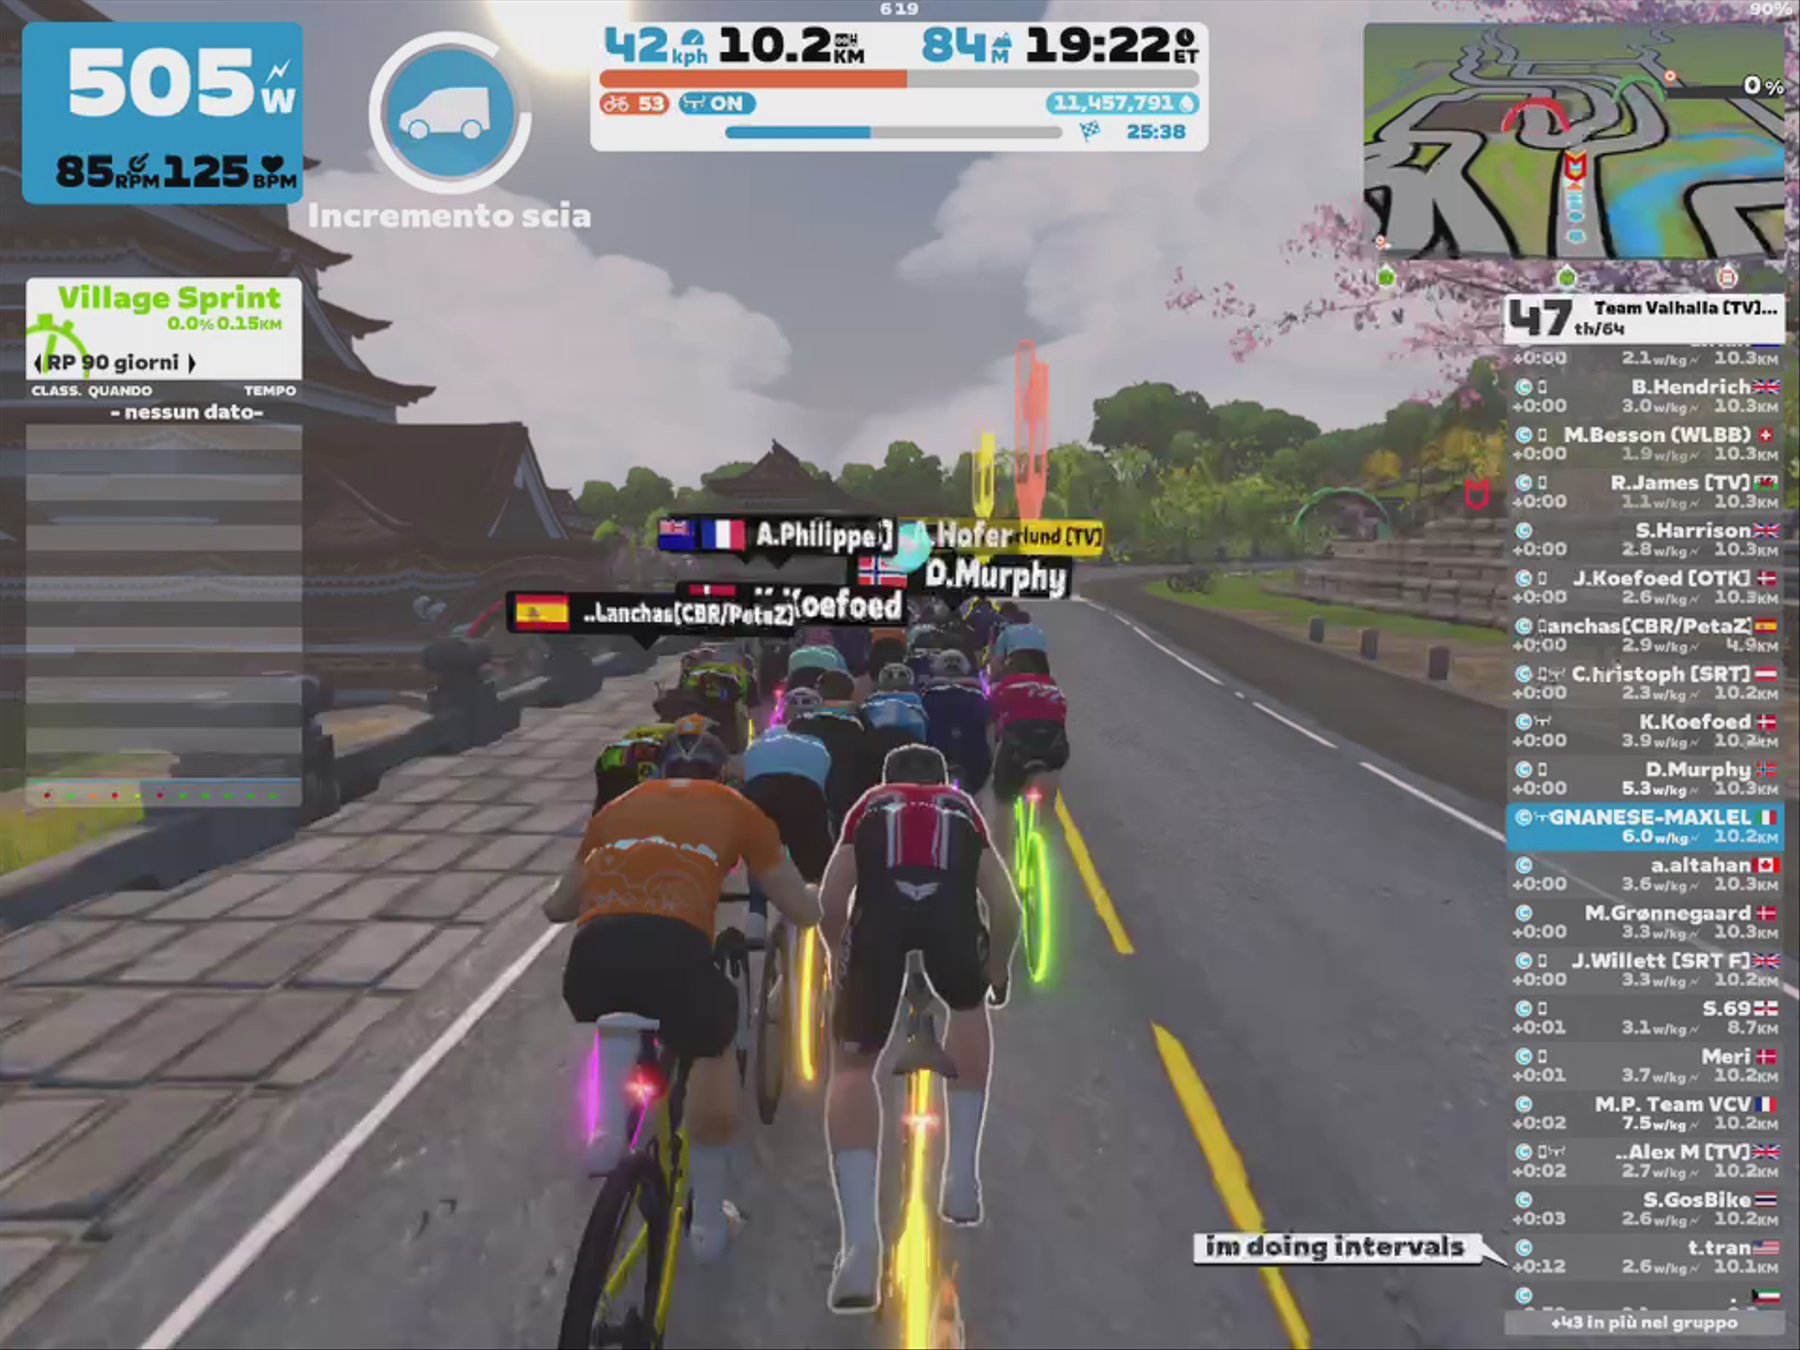 Zwift - Group Ride: Team Valhalla [TV] FriYay Funday Ride (C) on Two Village Loop in Makuri Islands